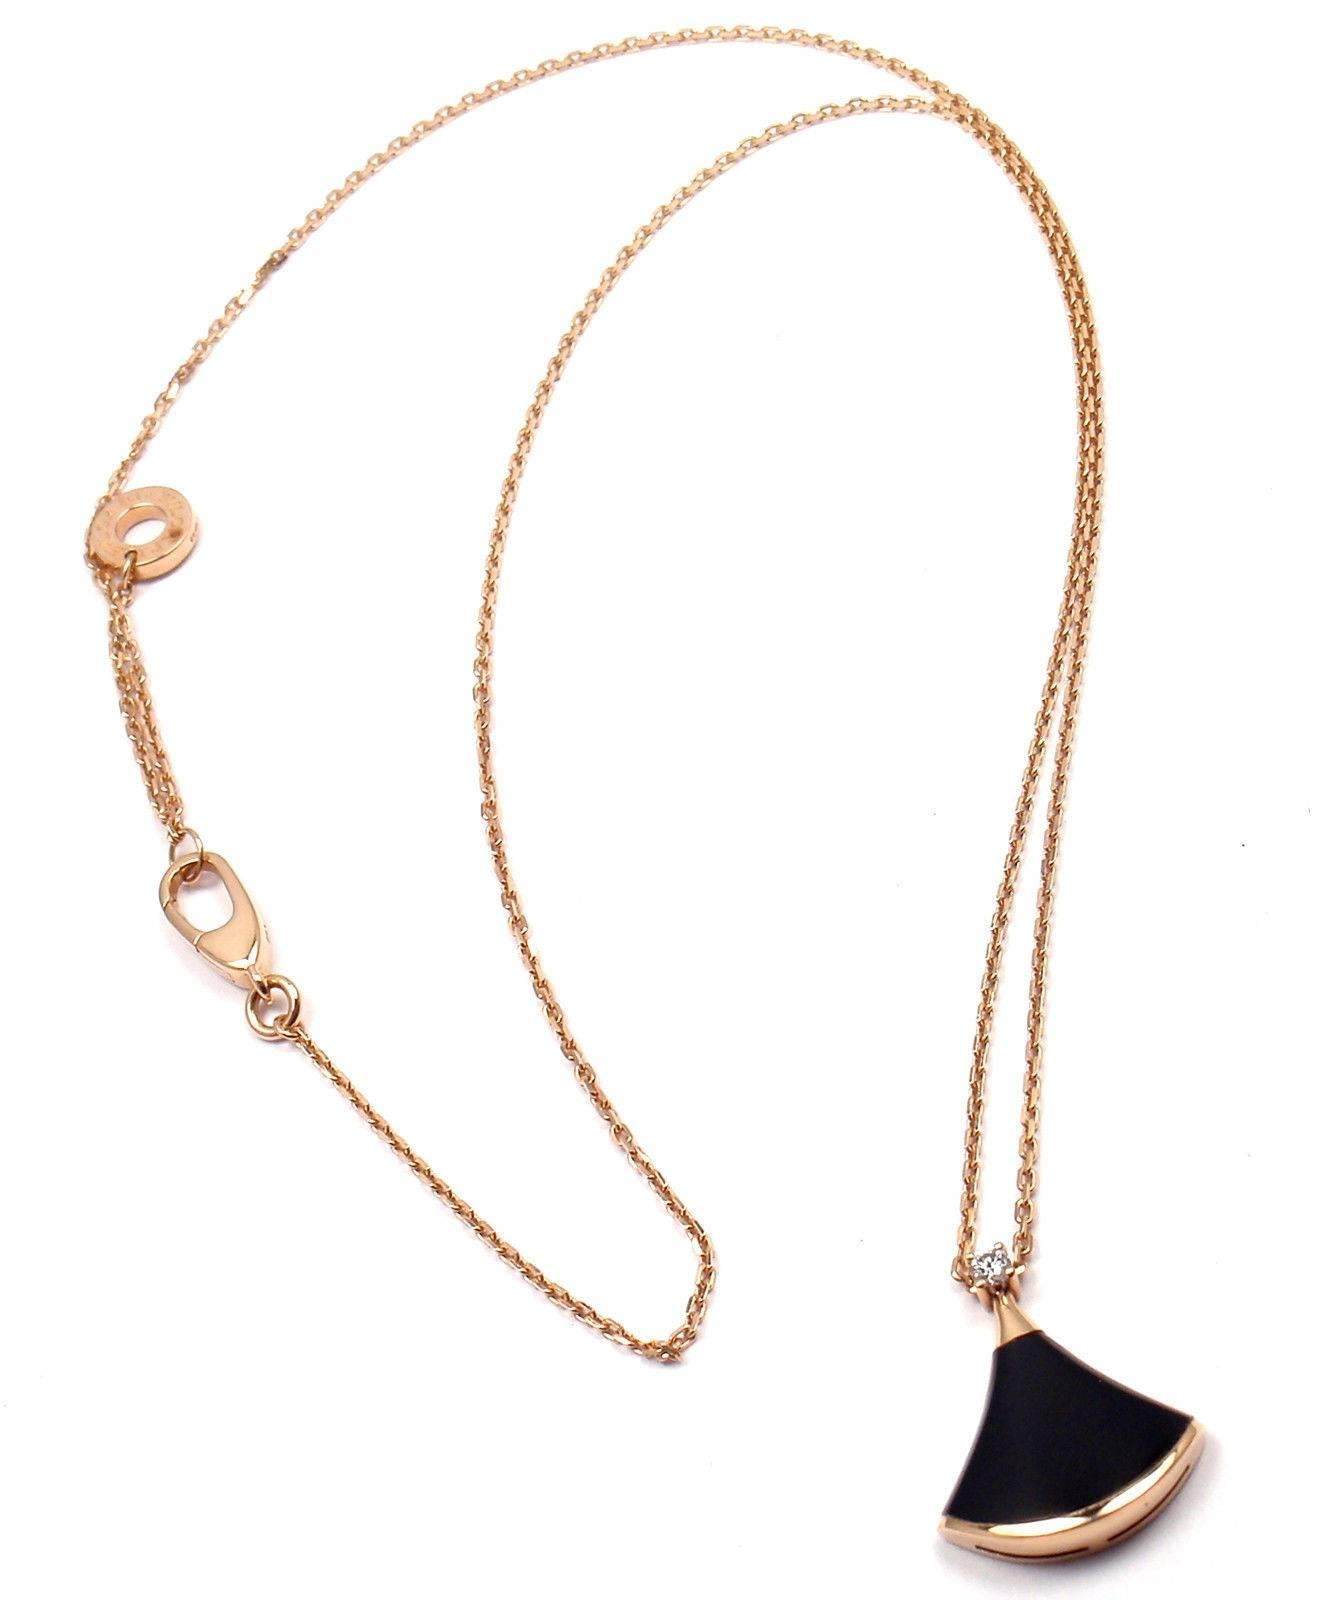 18k Rose Gold Diamond Black Onyx Divas' Dream Necklace by Bulgari. 
With 1 round brilliant cut diamonds VS1 clarity, G color total weight approx. .05ct
Black Onyx

Details:
Weight: 4.4 grams
Length: 17", 16"
Width: 1mm
Pendant: 16mm x